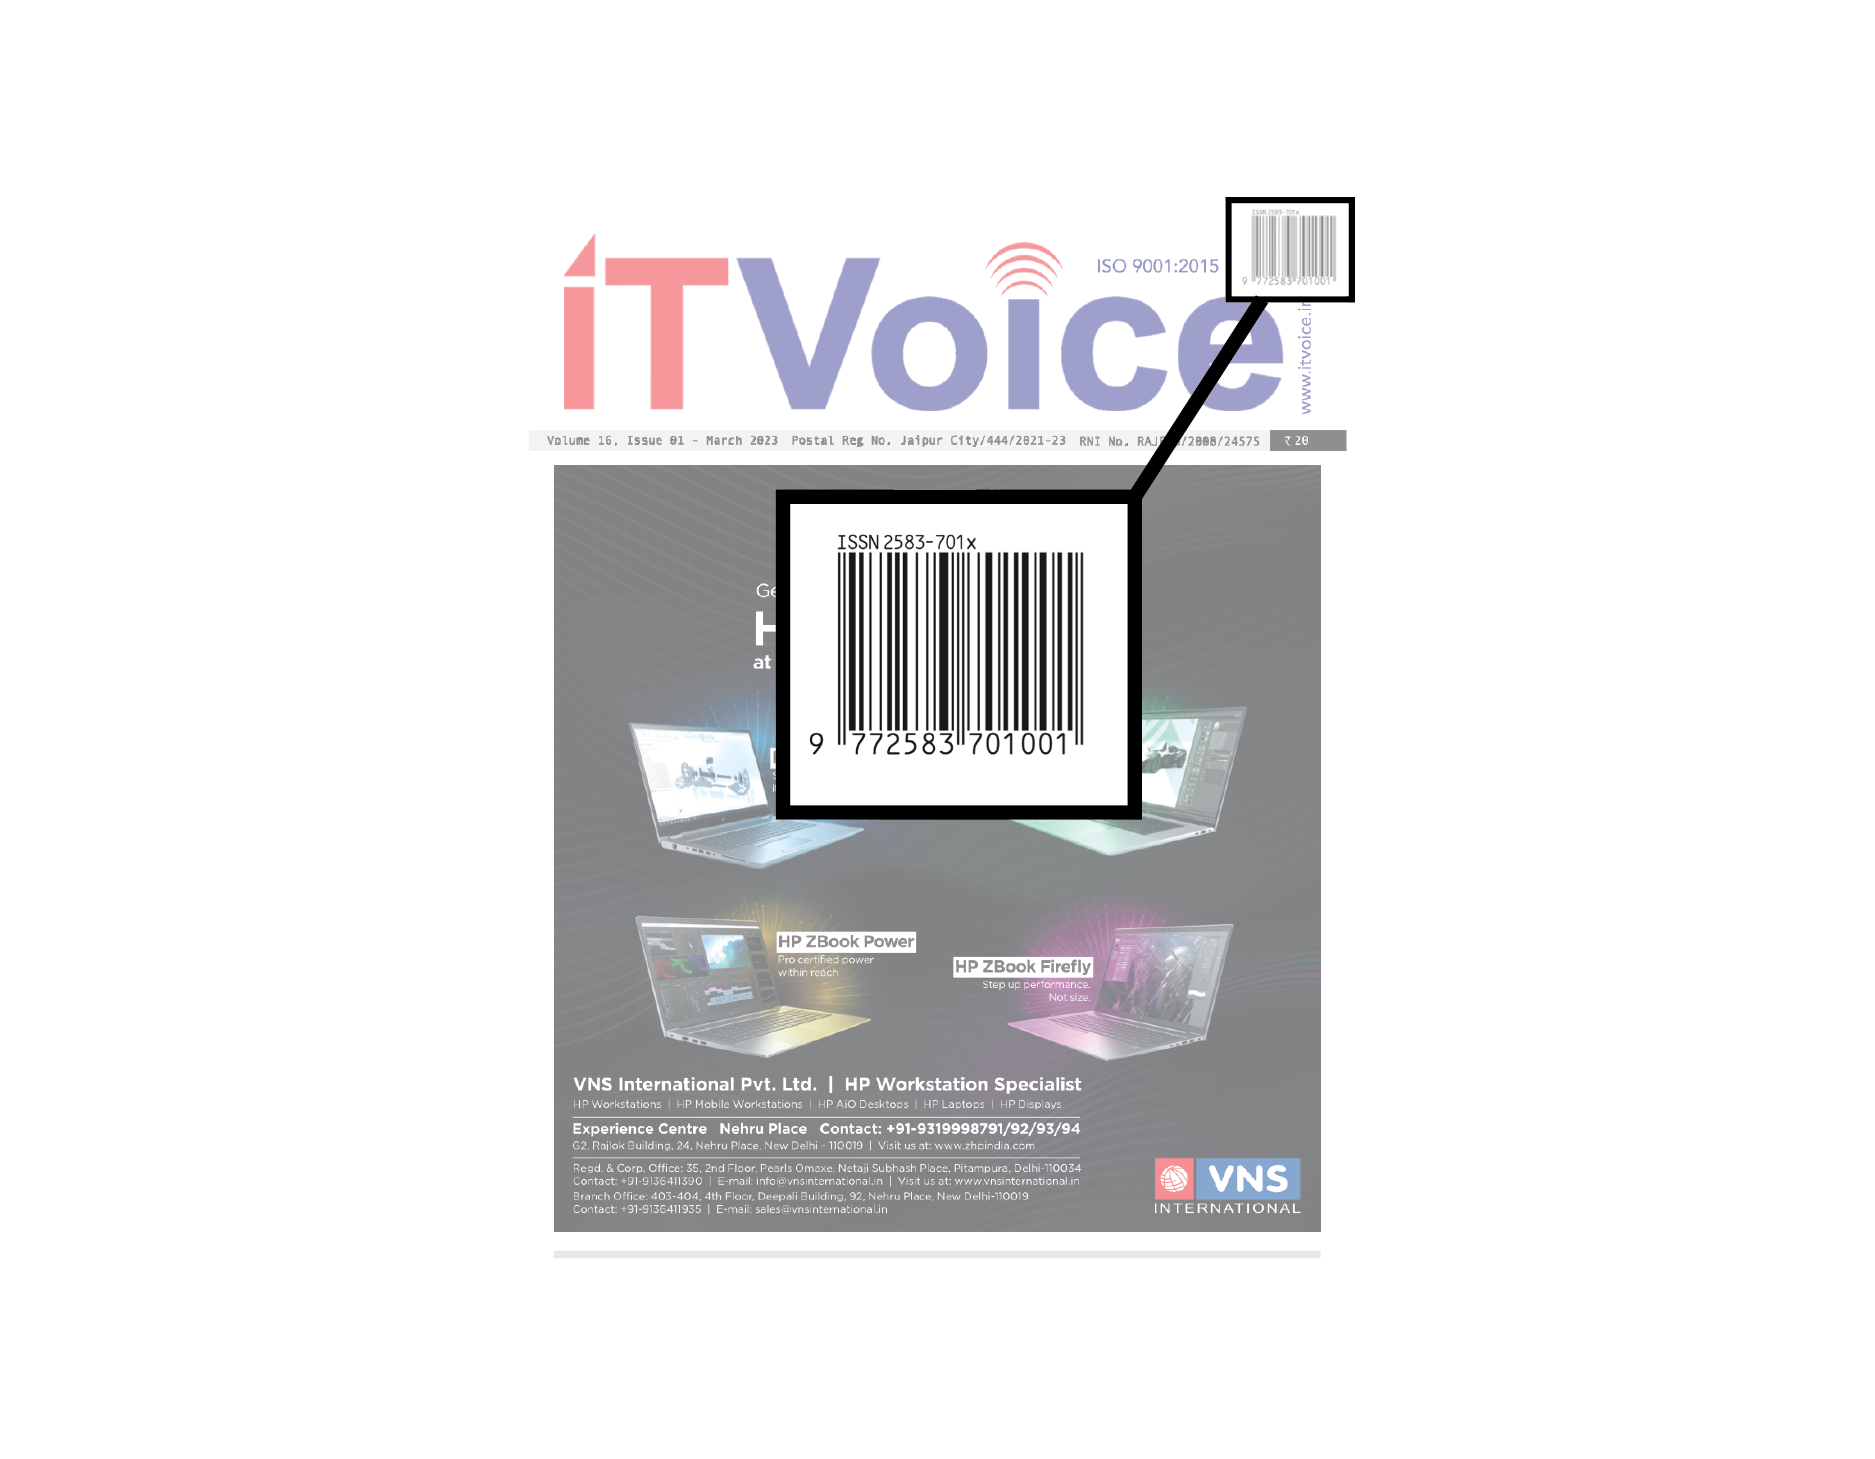 IT Voice Media Receives International Standard Serial Number (ISSN) Certification